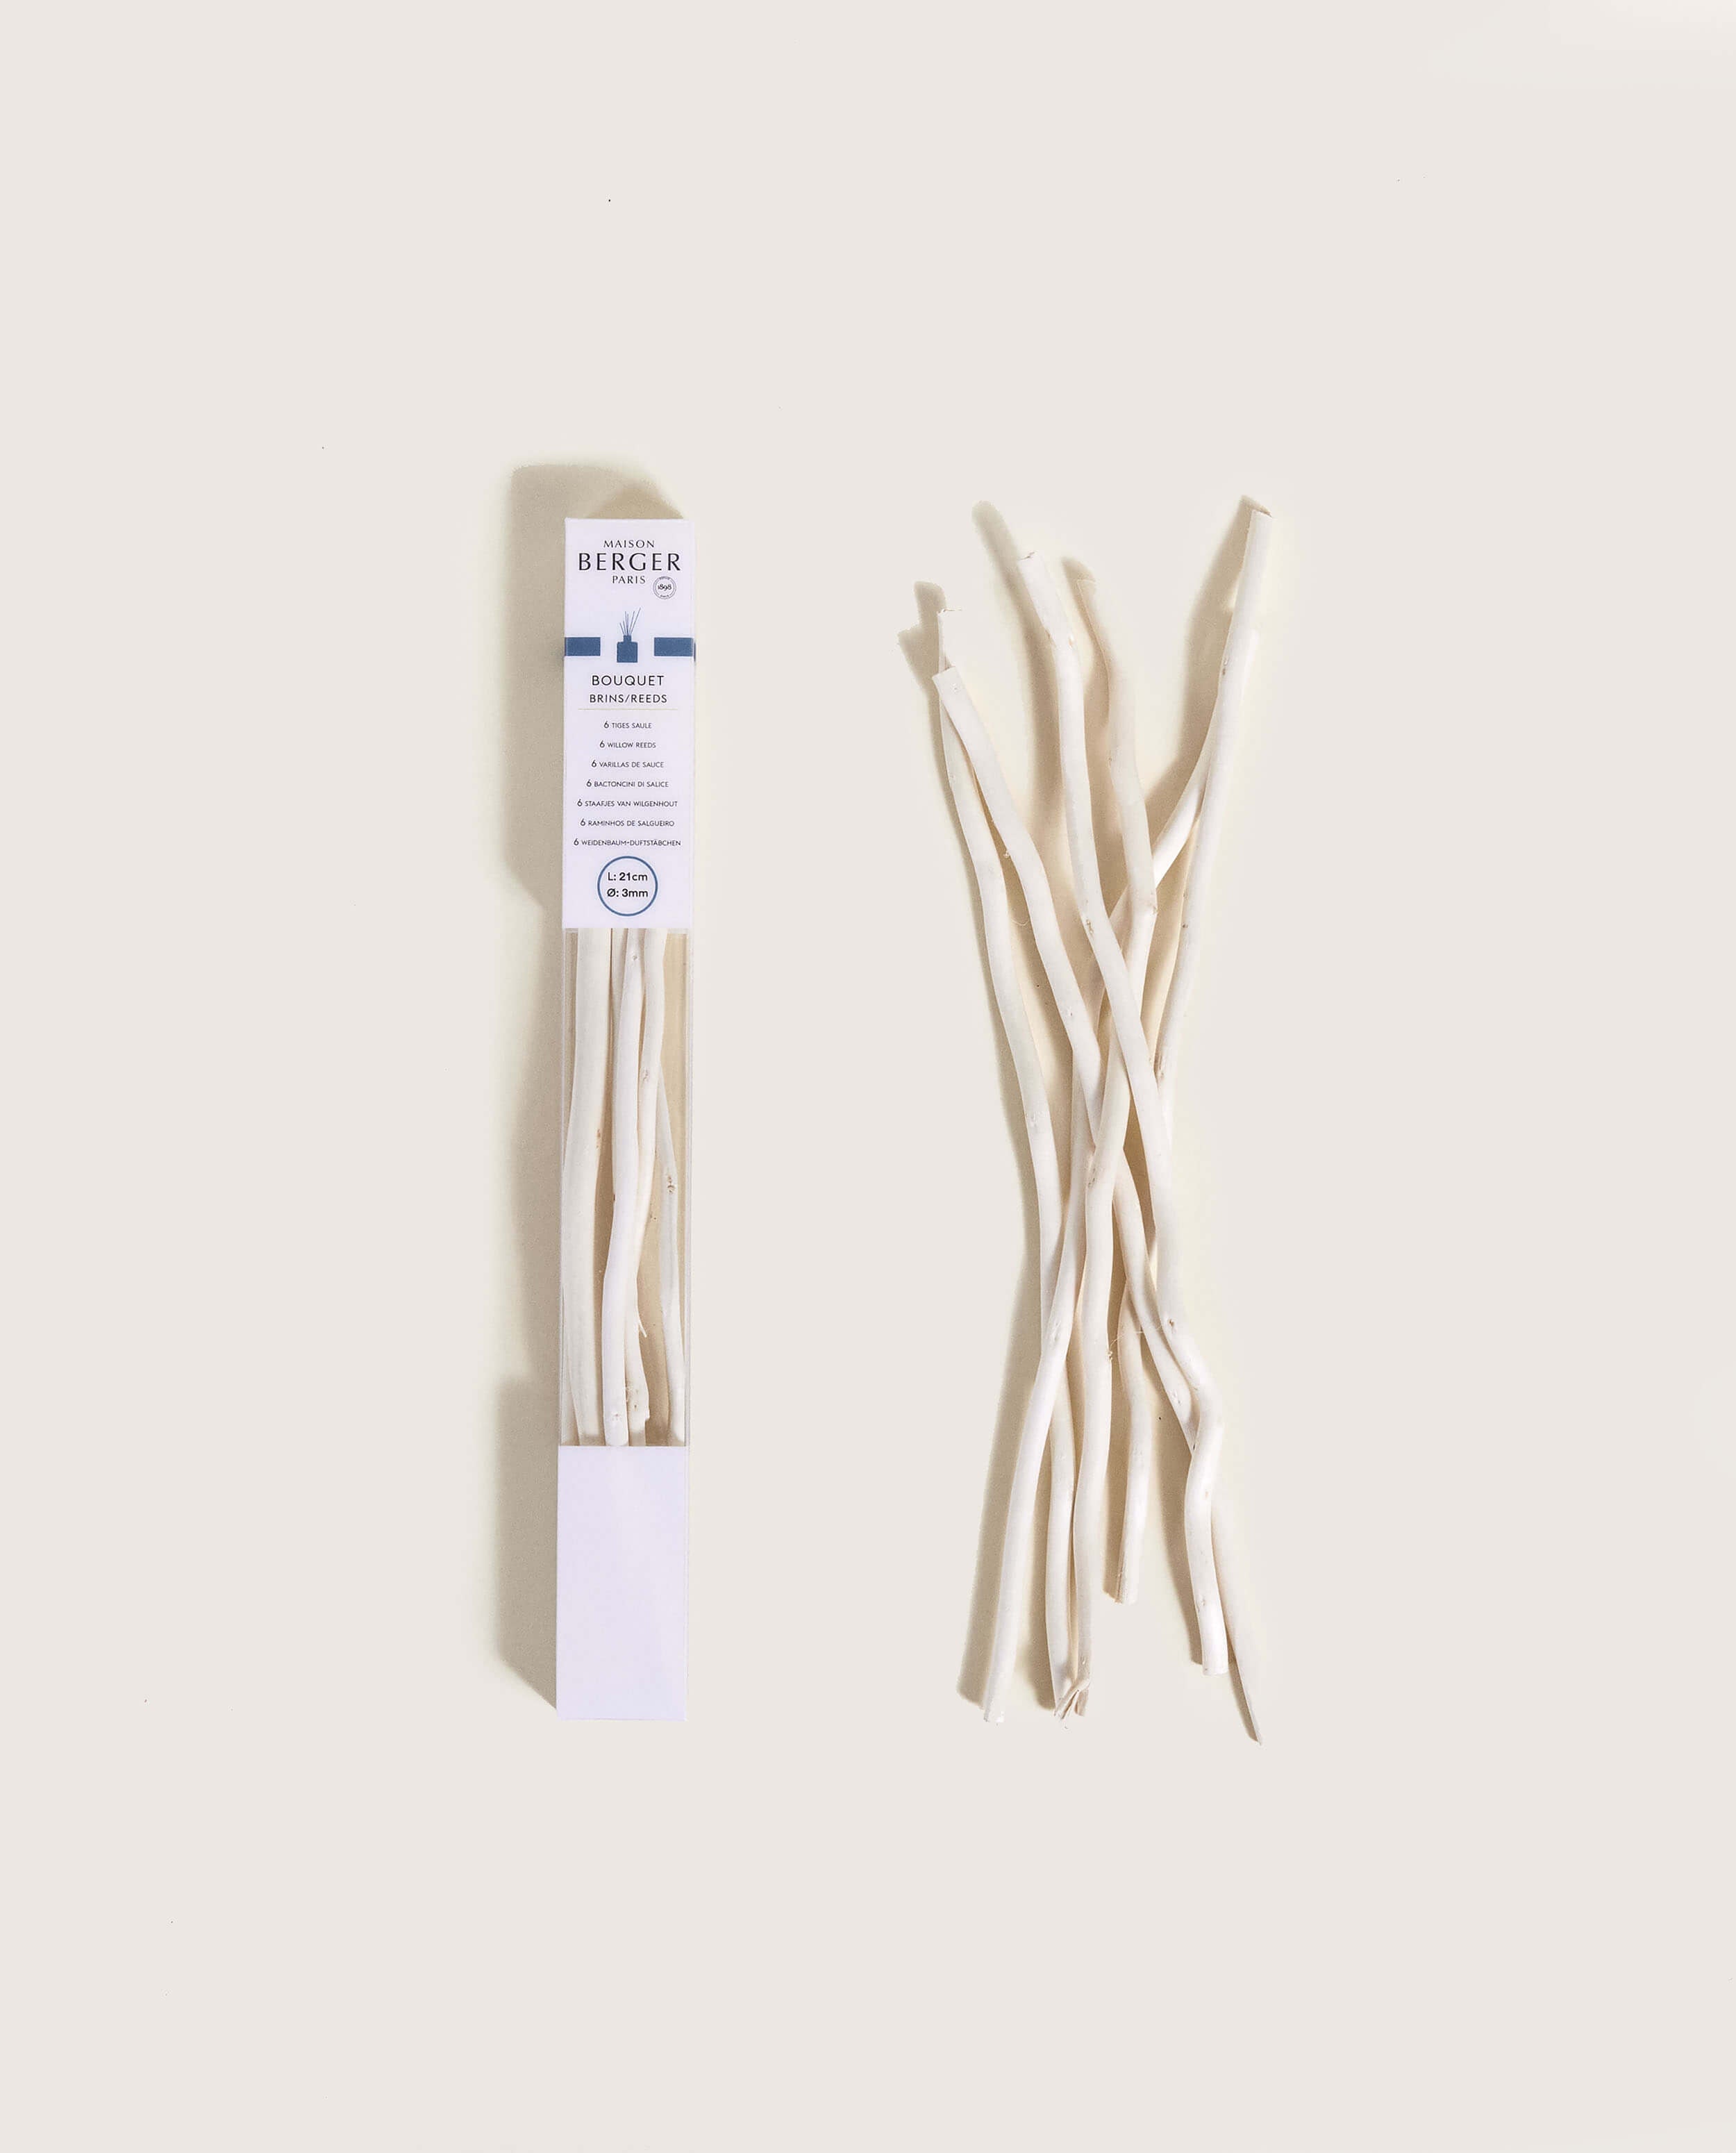 Polymer Diffuser Sticks - Maison Berger by Lampe Berger - Candles To My Door